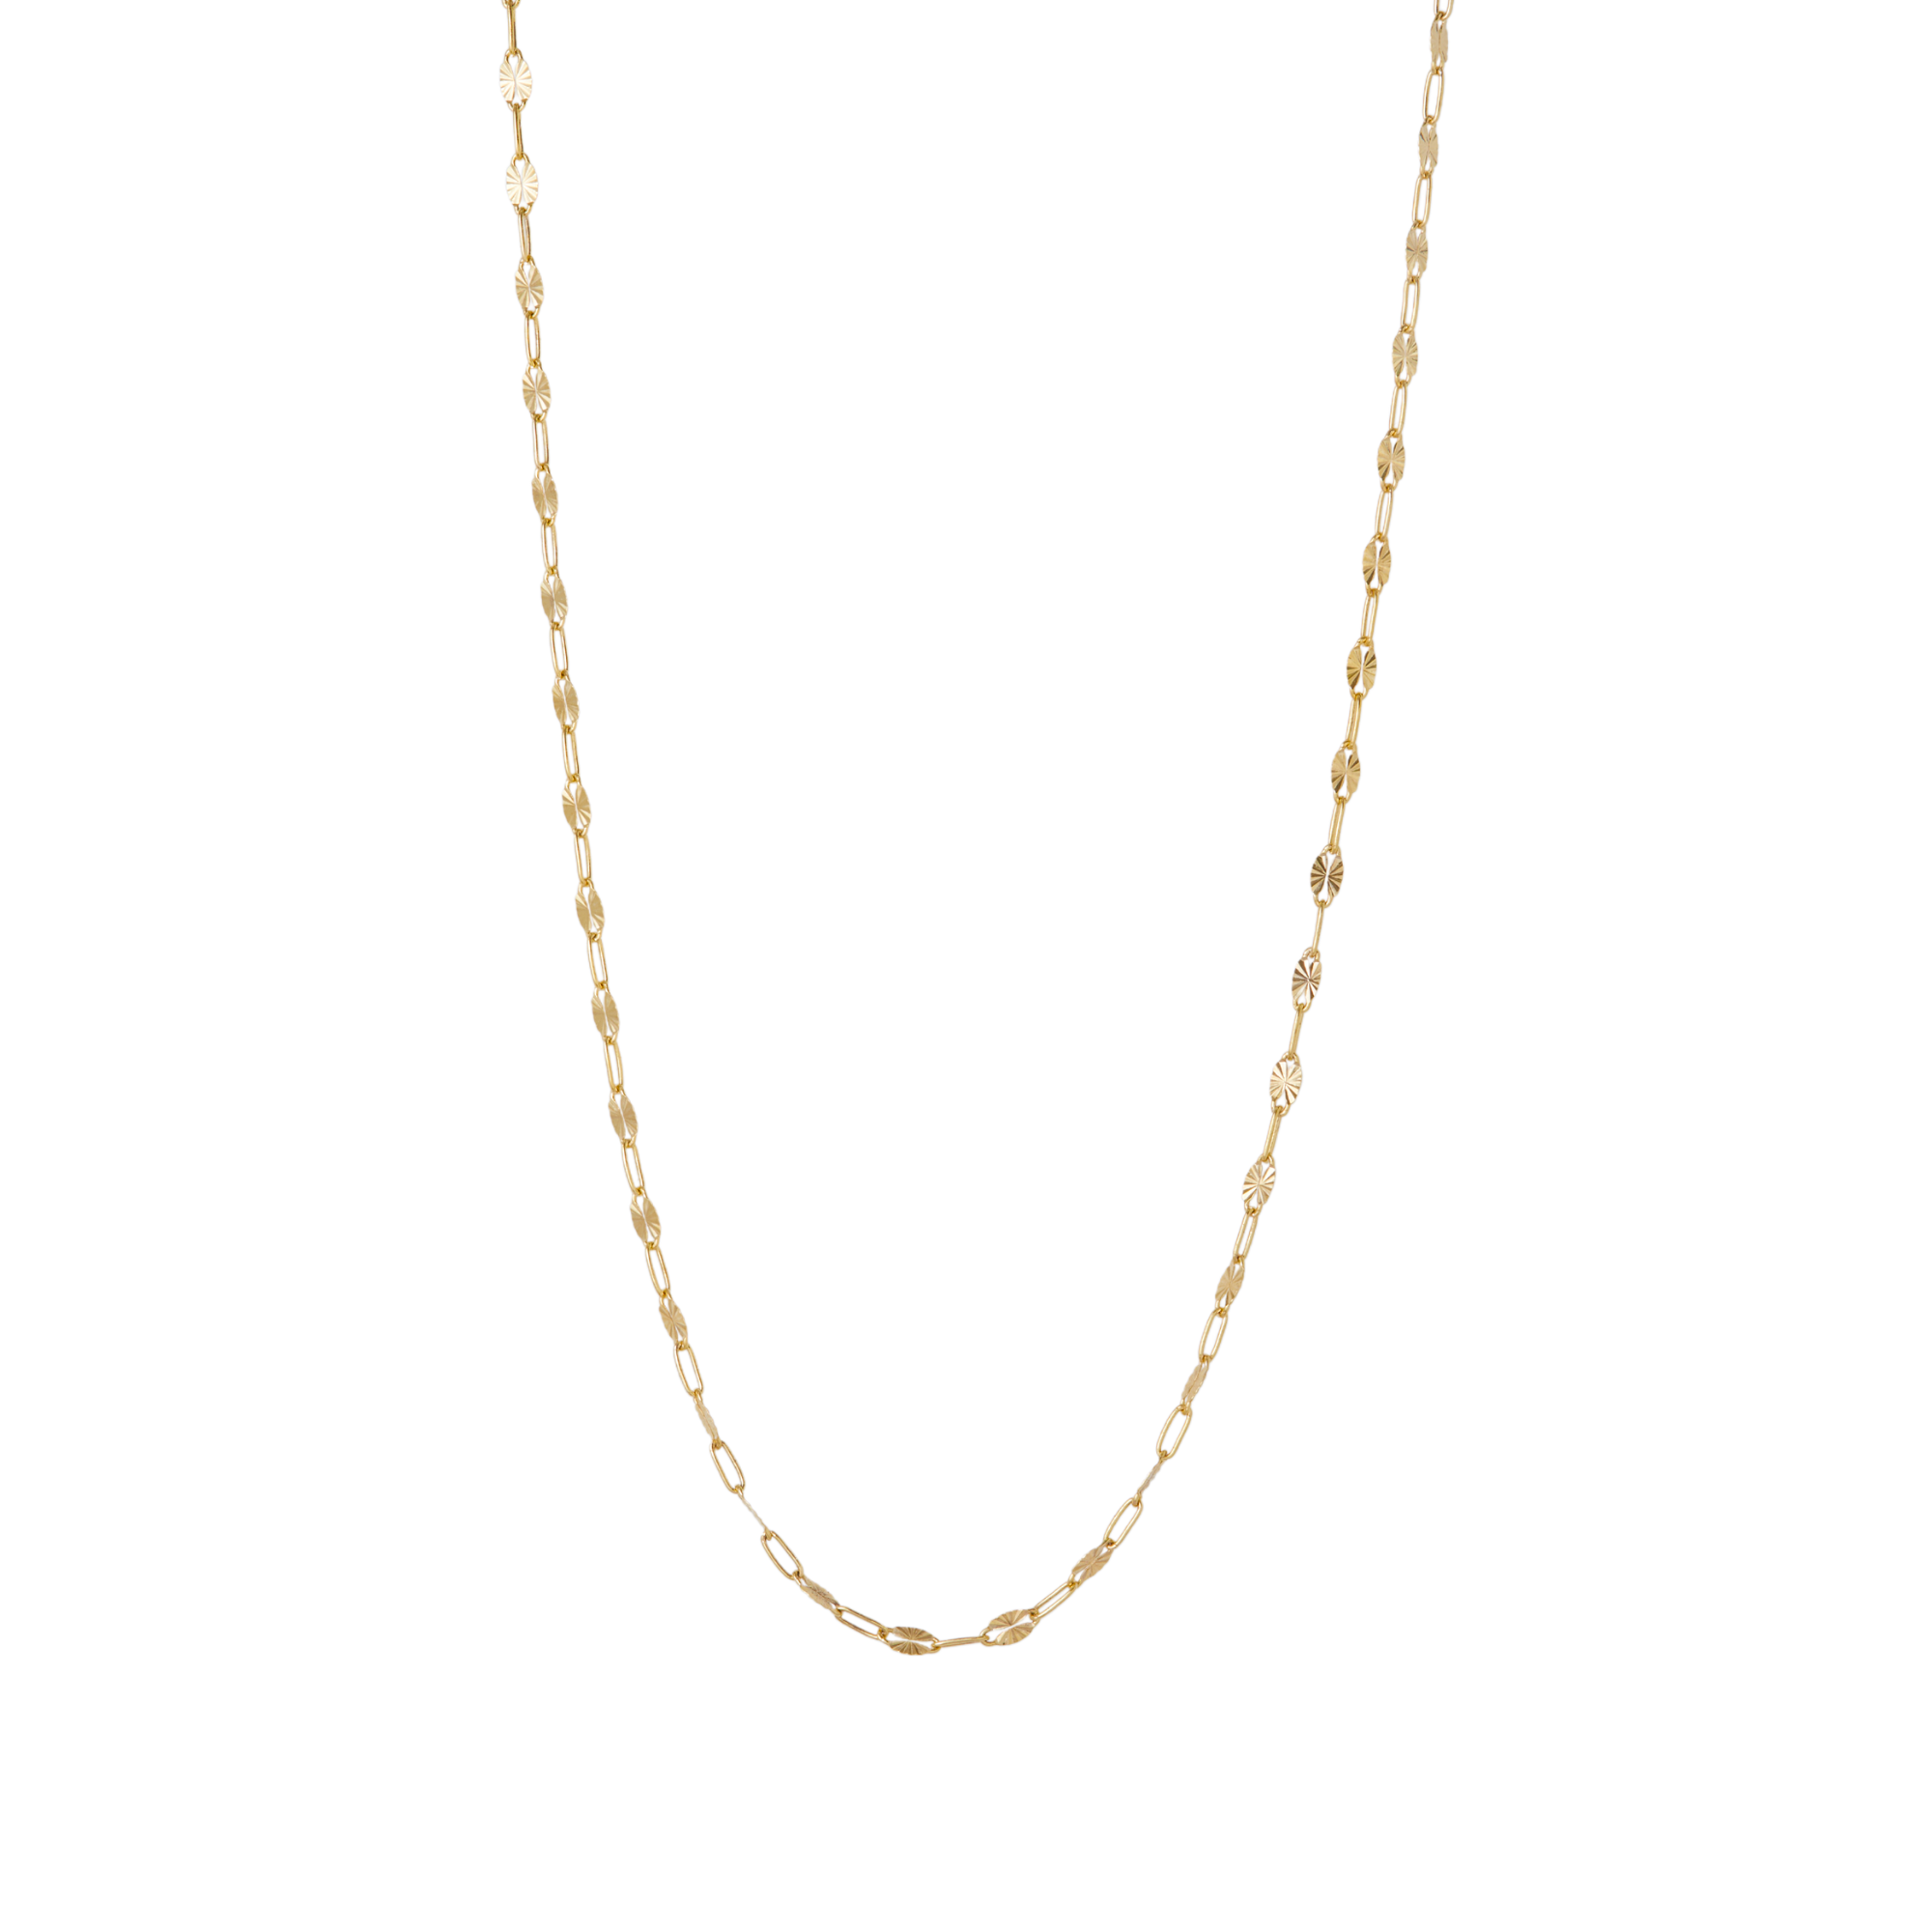 THE OVAL CLIP CHAIN NECKLACE